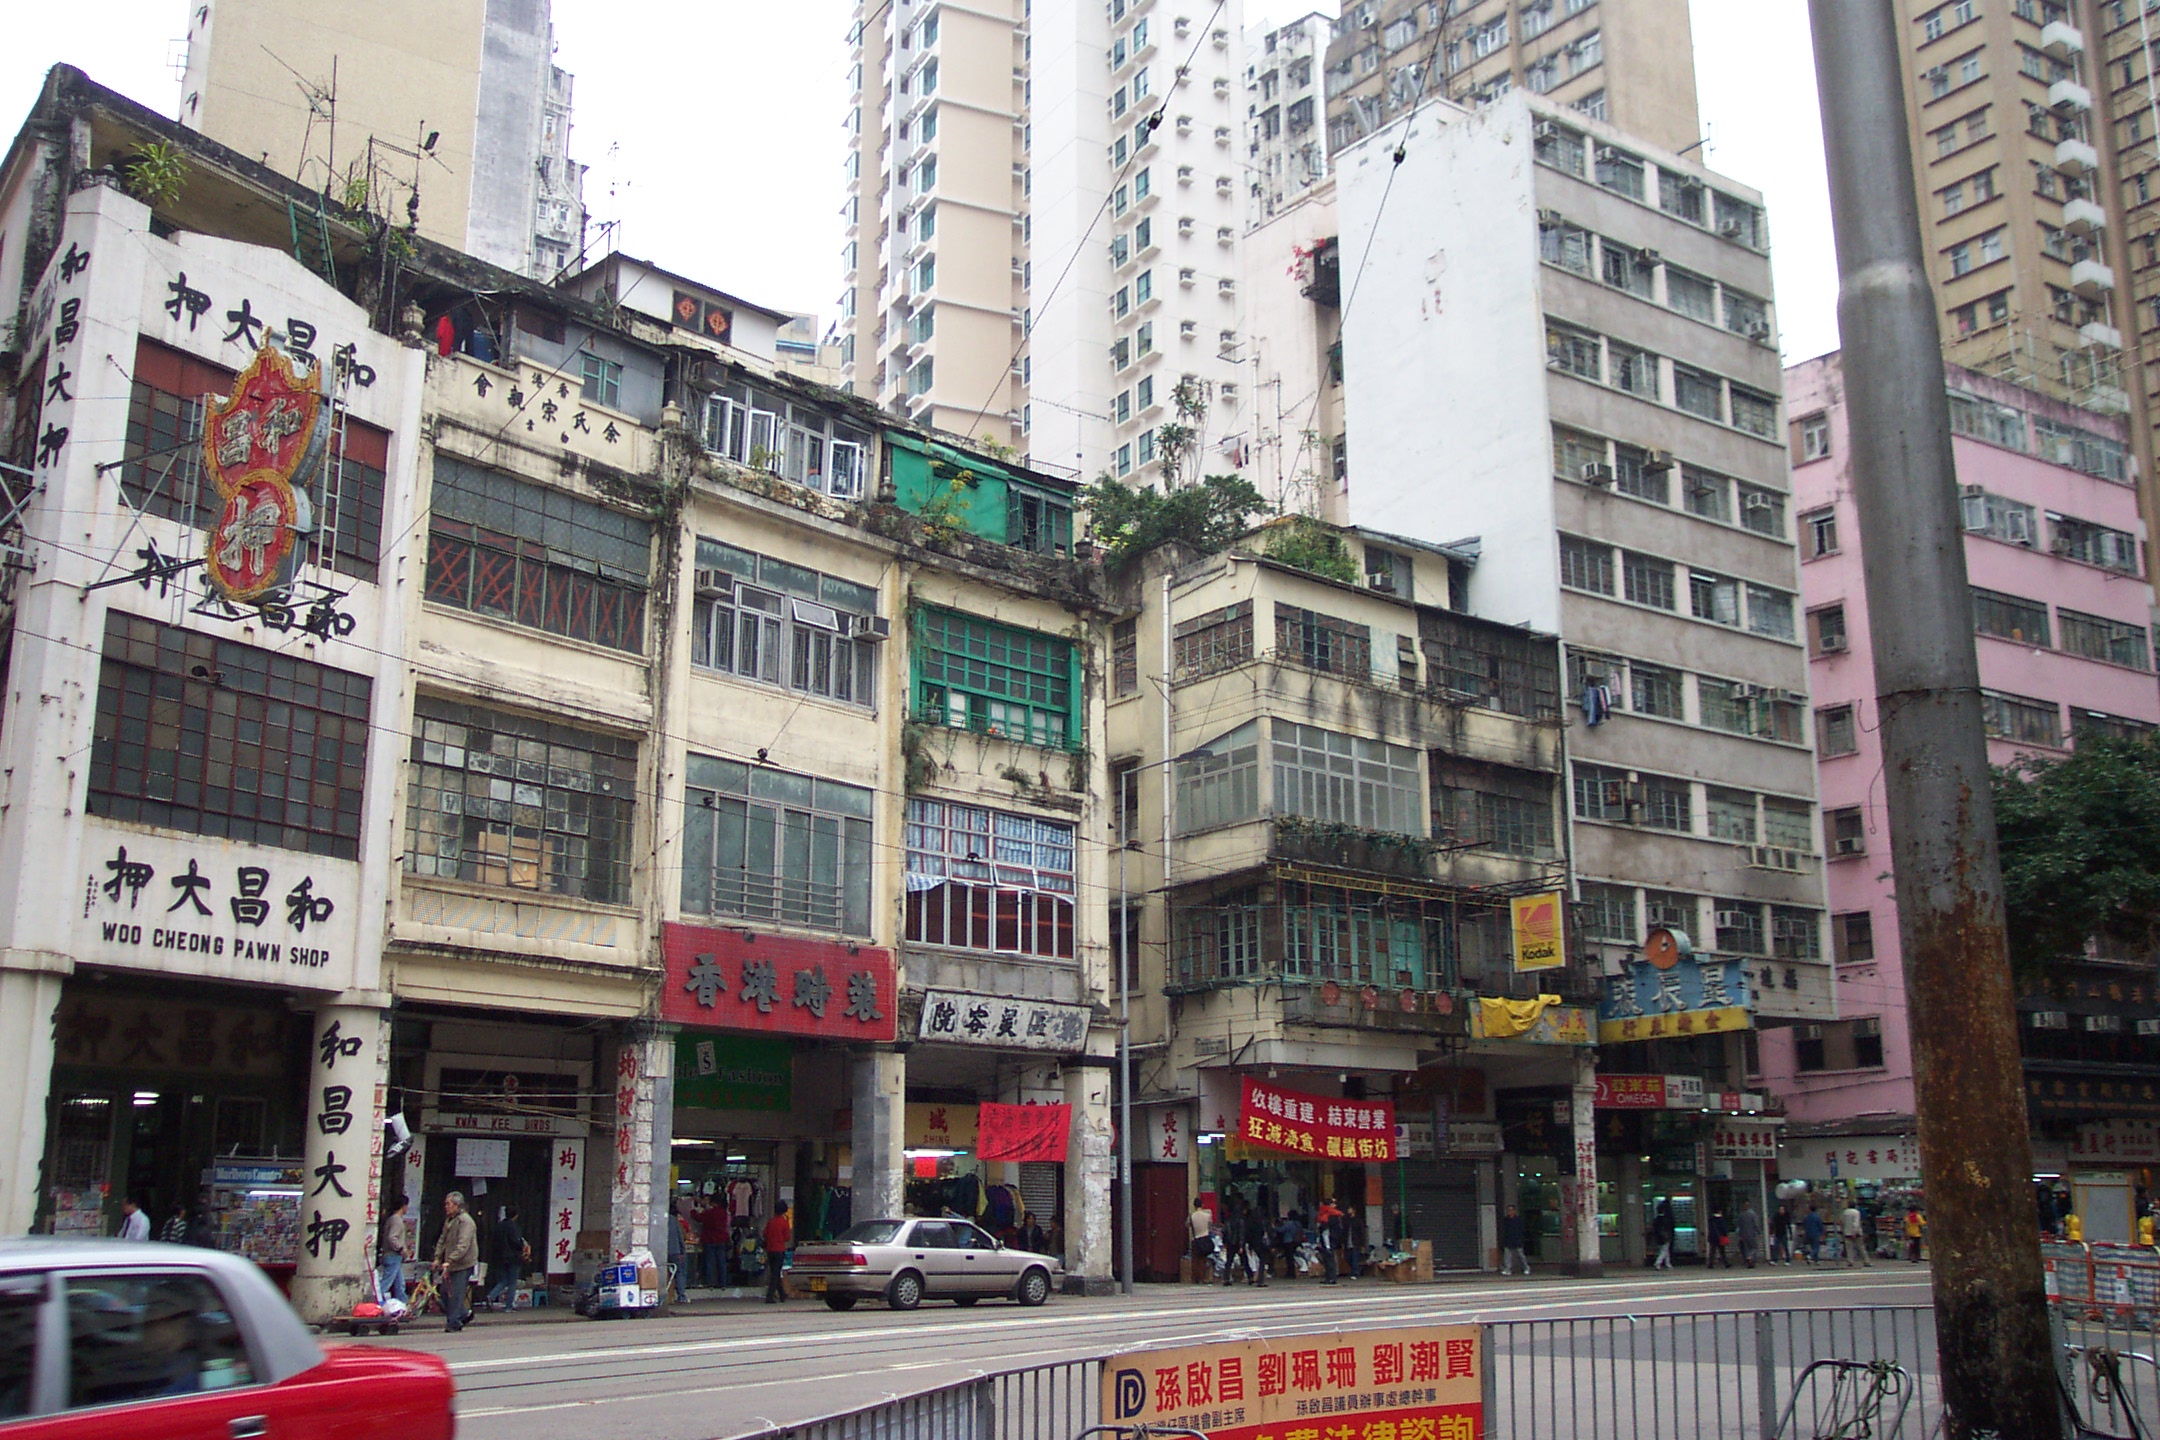 a street in an oriental city filled with tall buildings